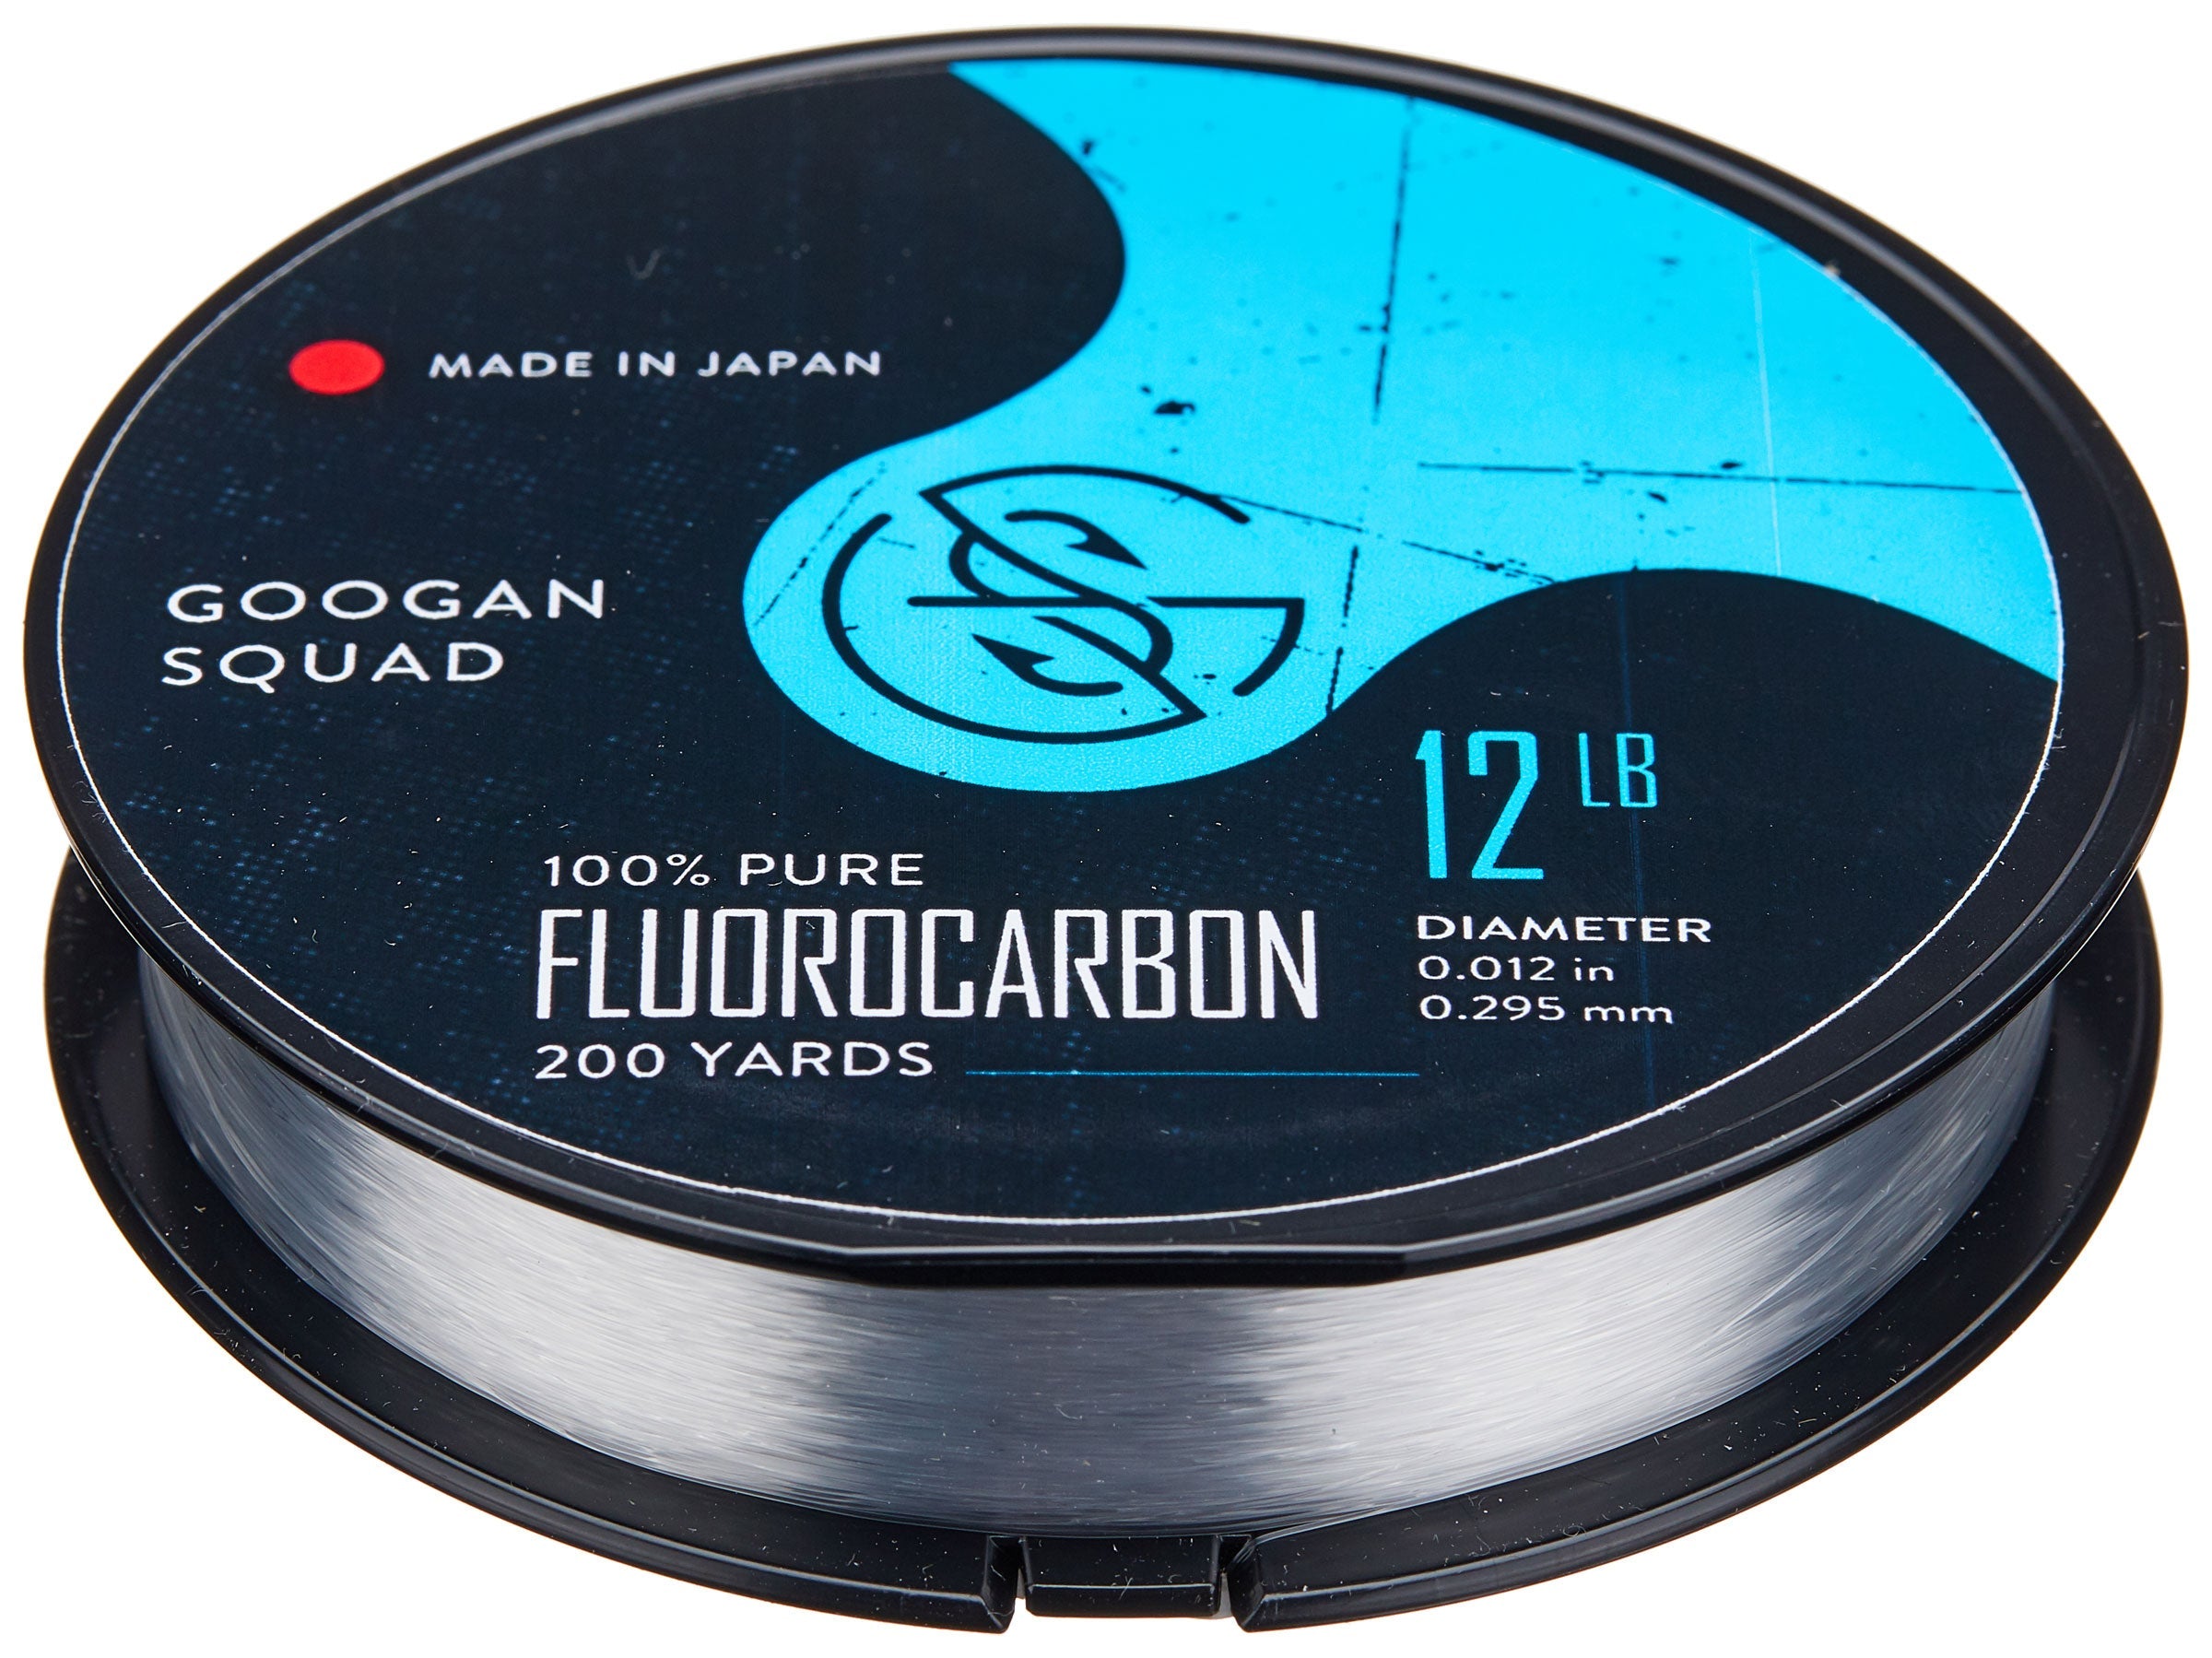 Googan Squad Fluorocarbon Line – Lures and Lead